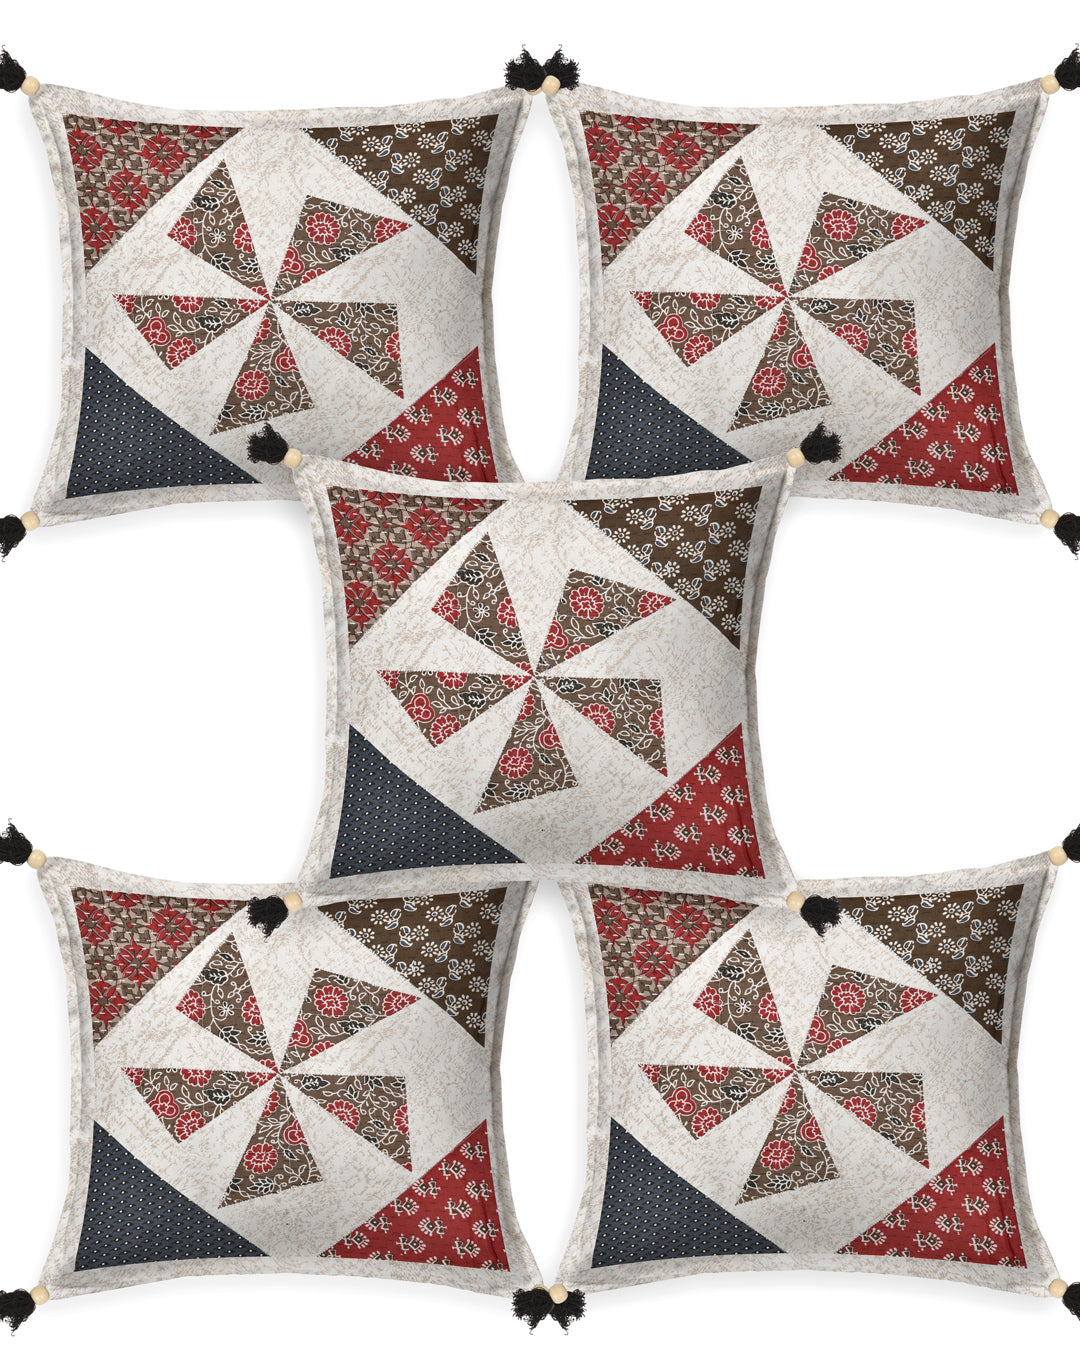 Living Roots Patchwork Cotton Cushion Cover- Set of 5 (40-027-C)